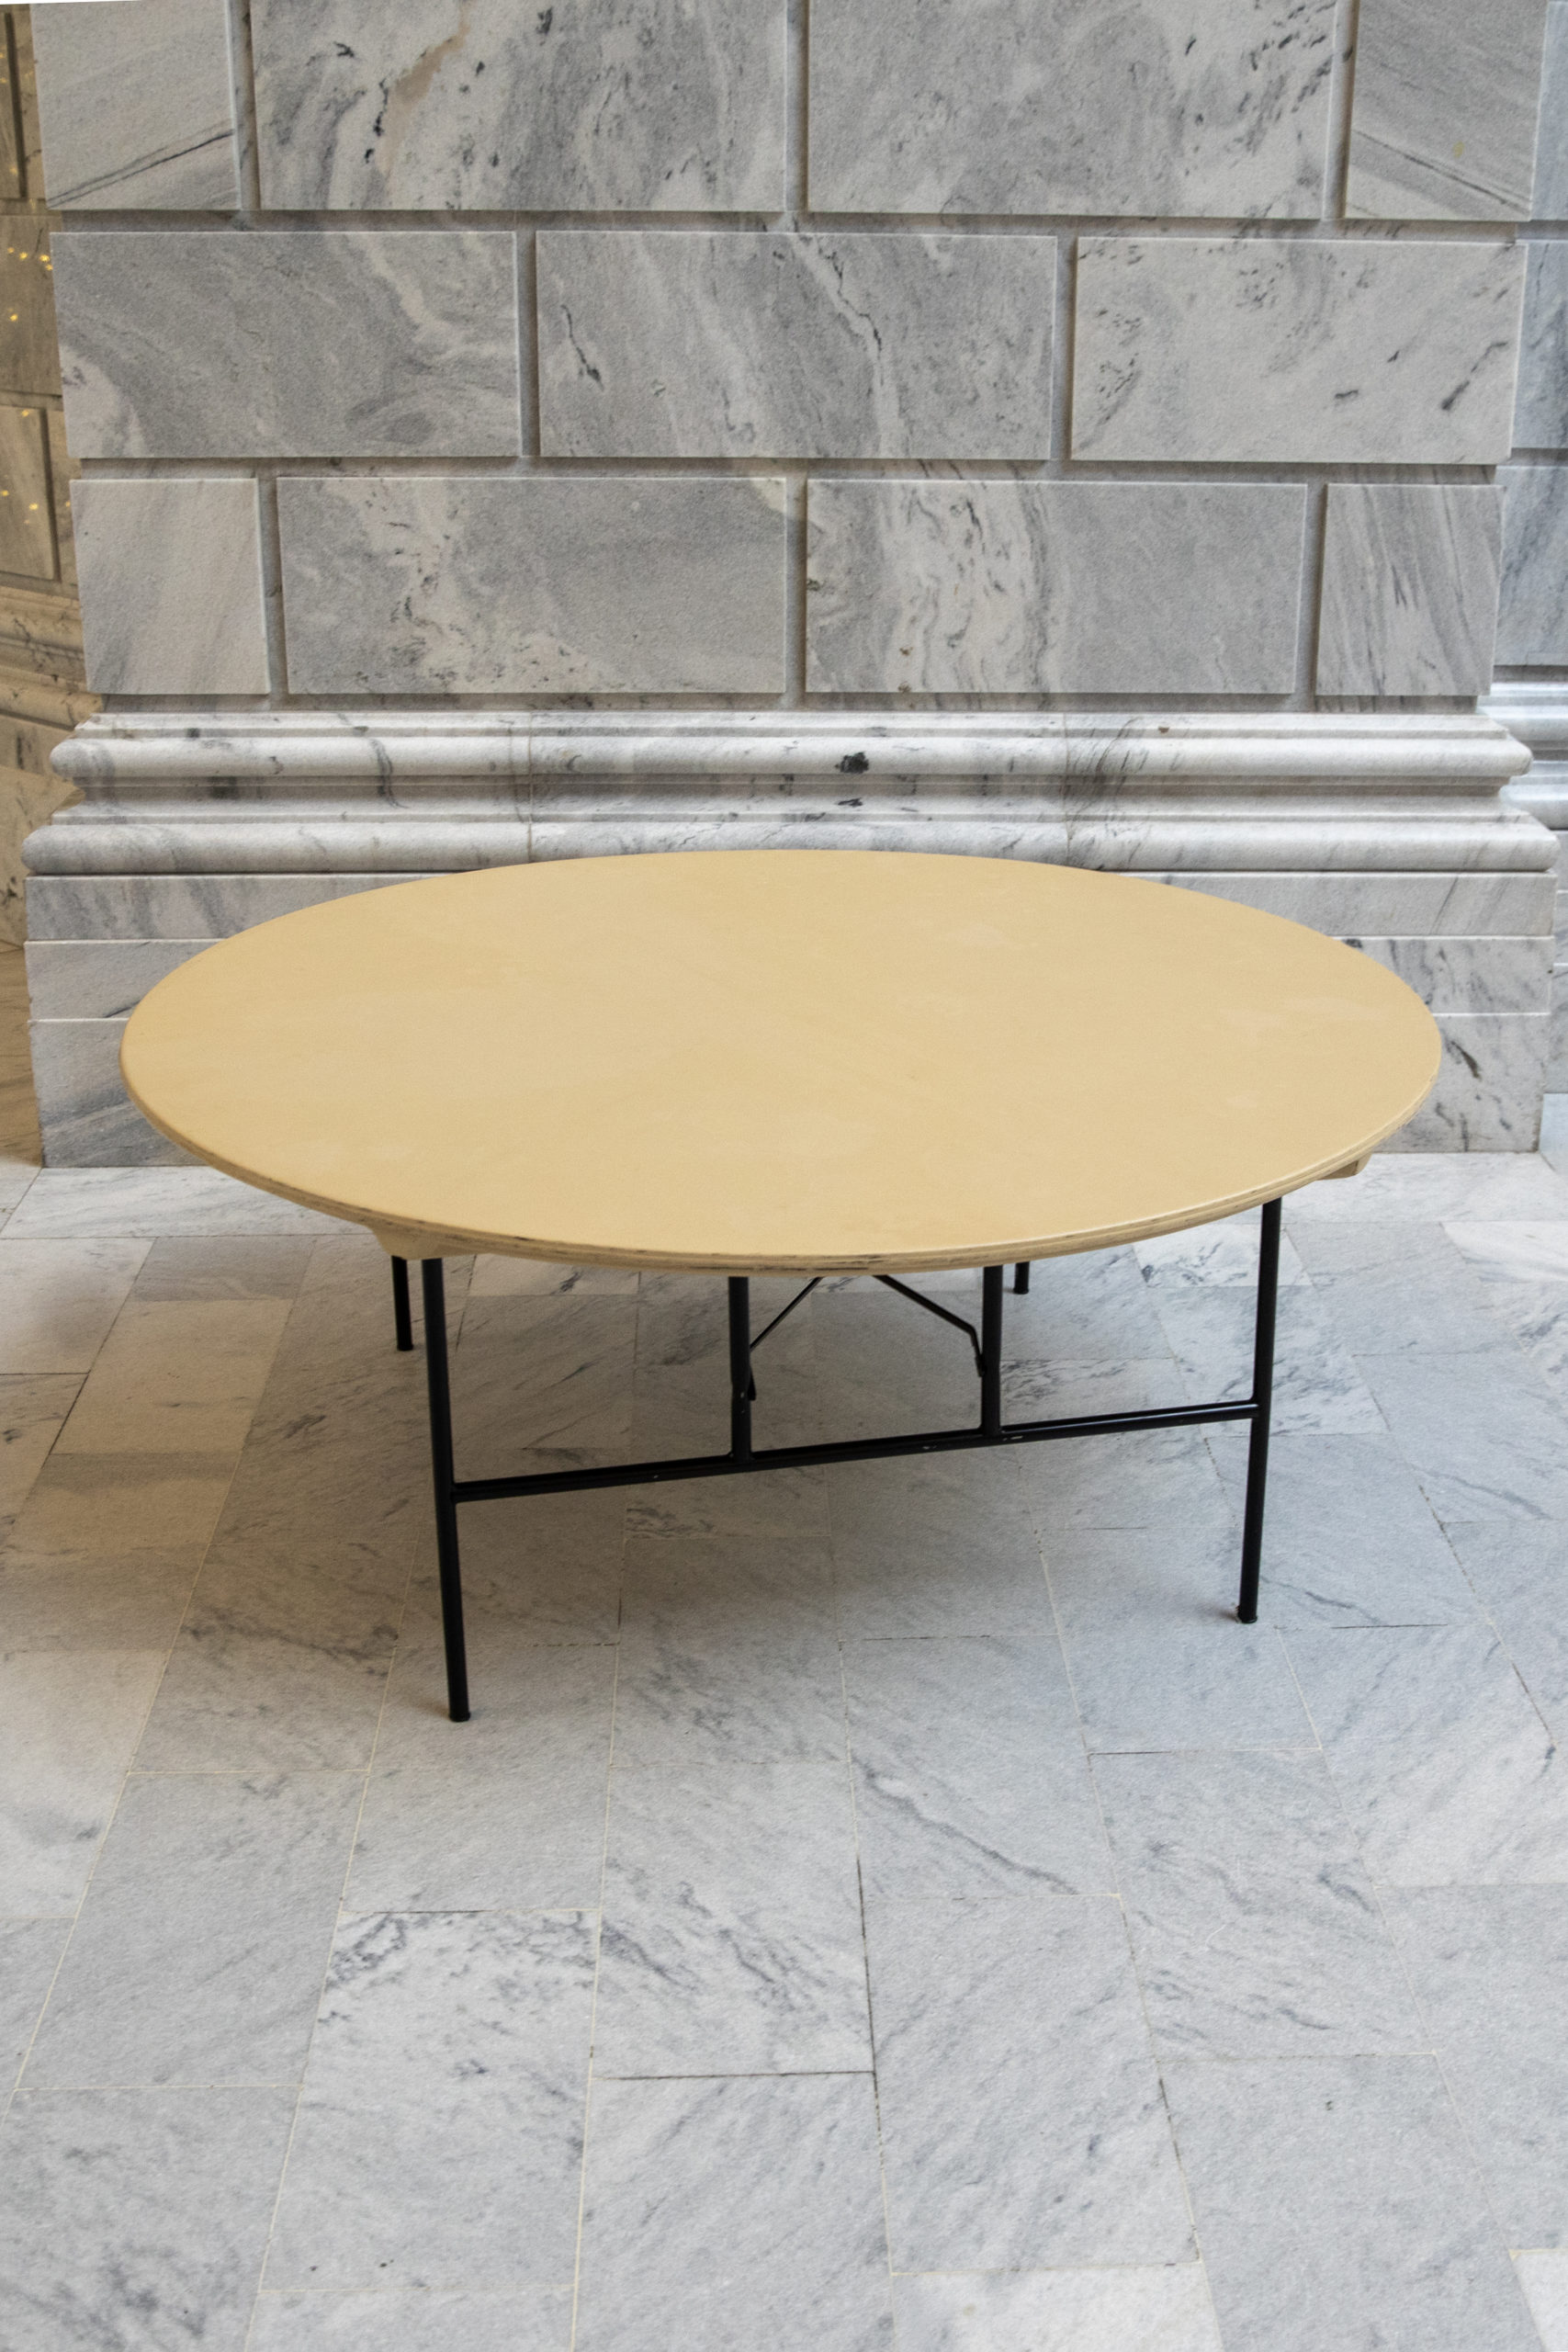 6' Round Table on marble backdrop